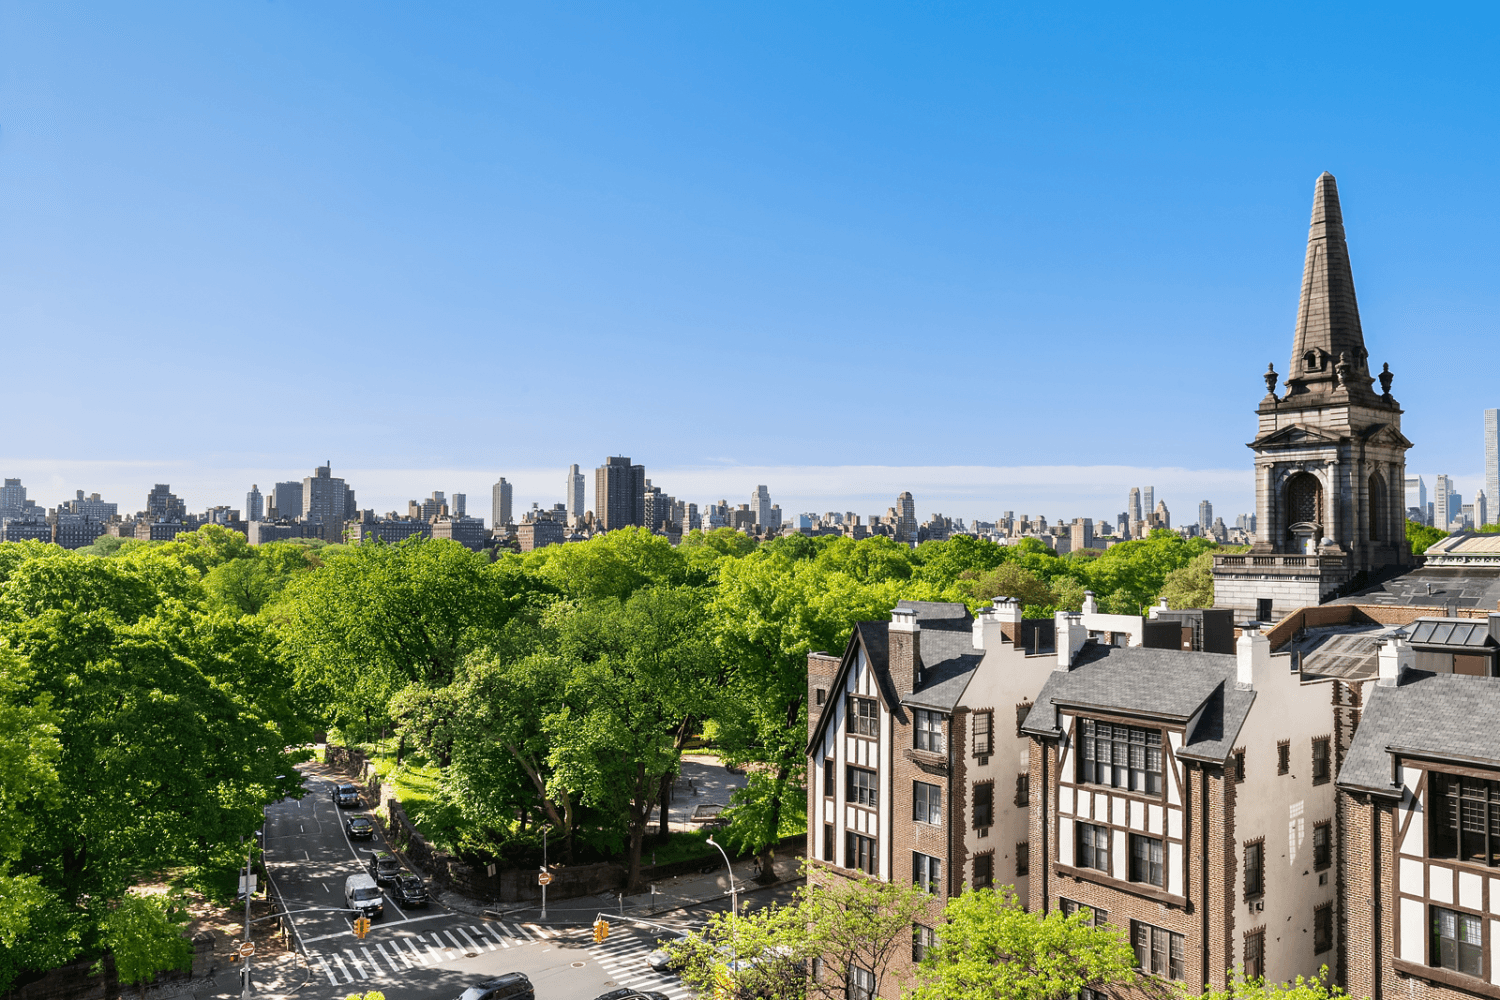 Immerse yourself in the serenity of Central Park with this exclusive offering at the prestigious Vaux Condominium.